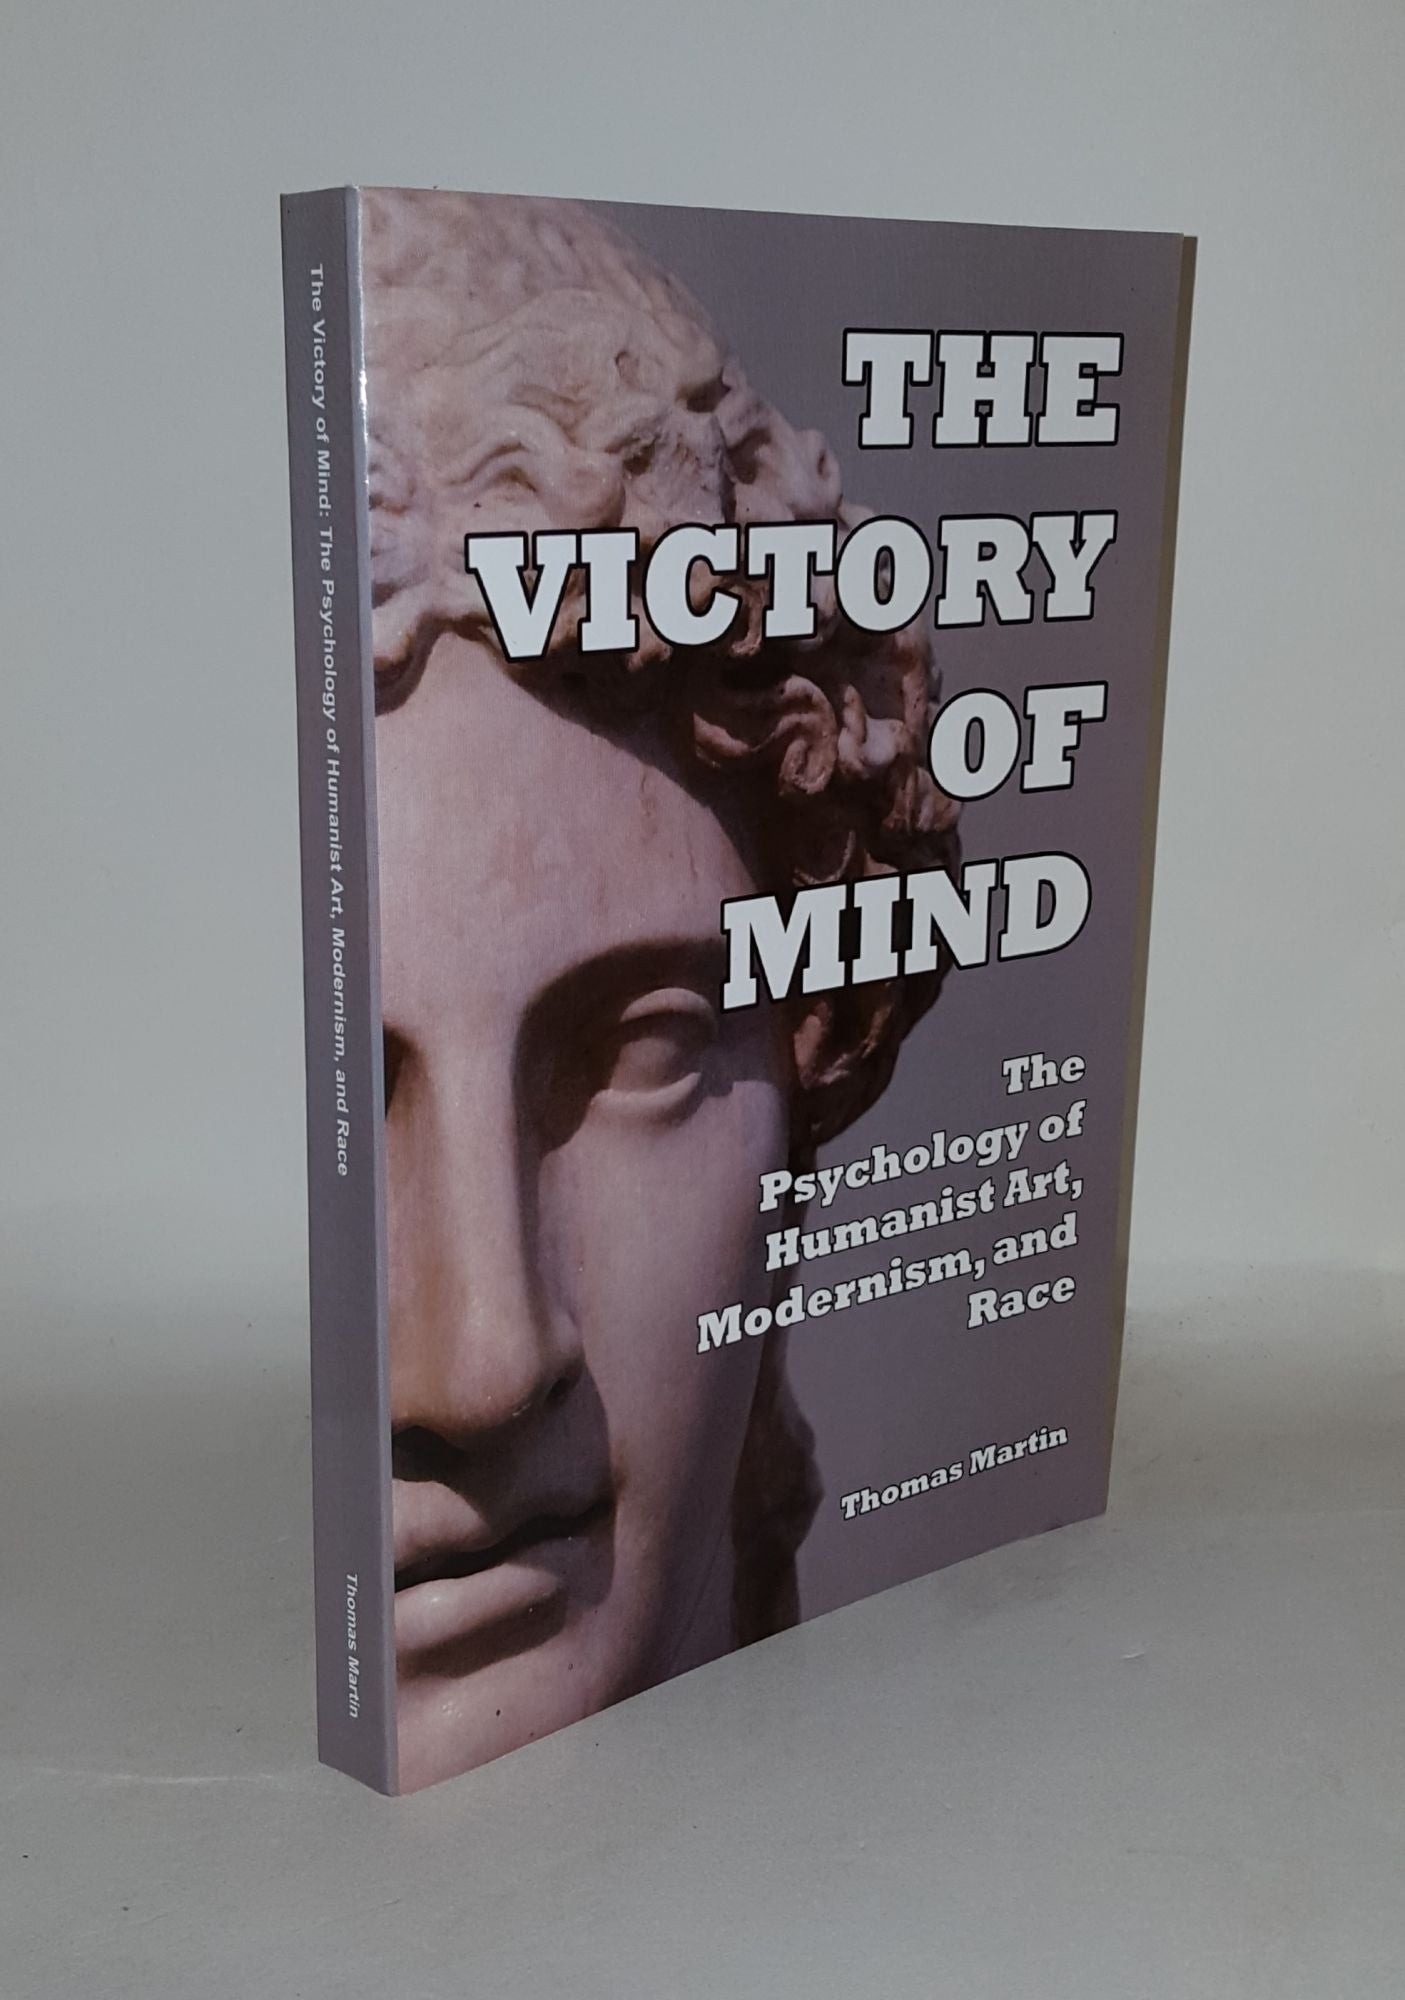 MARTIN Thomas - The Victory of the Mind the Psychology of Humanist Art Modernism and Race